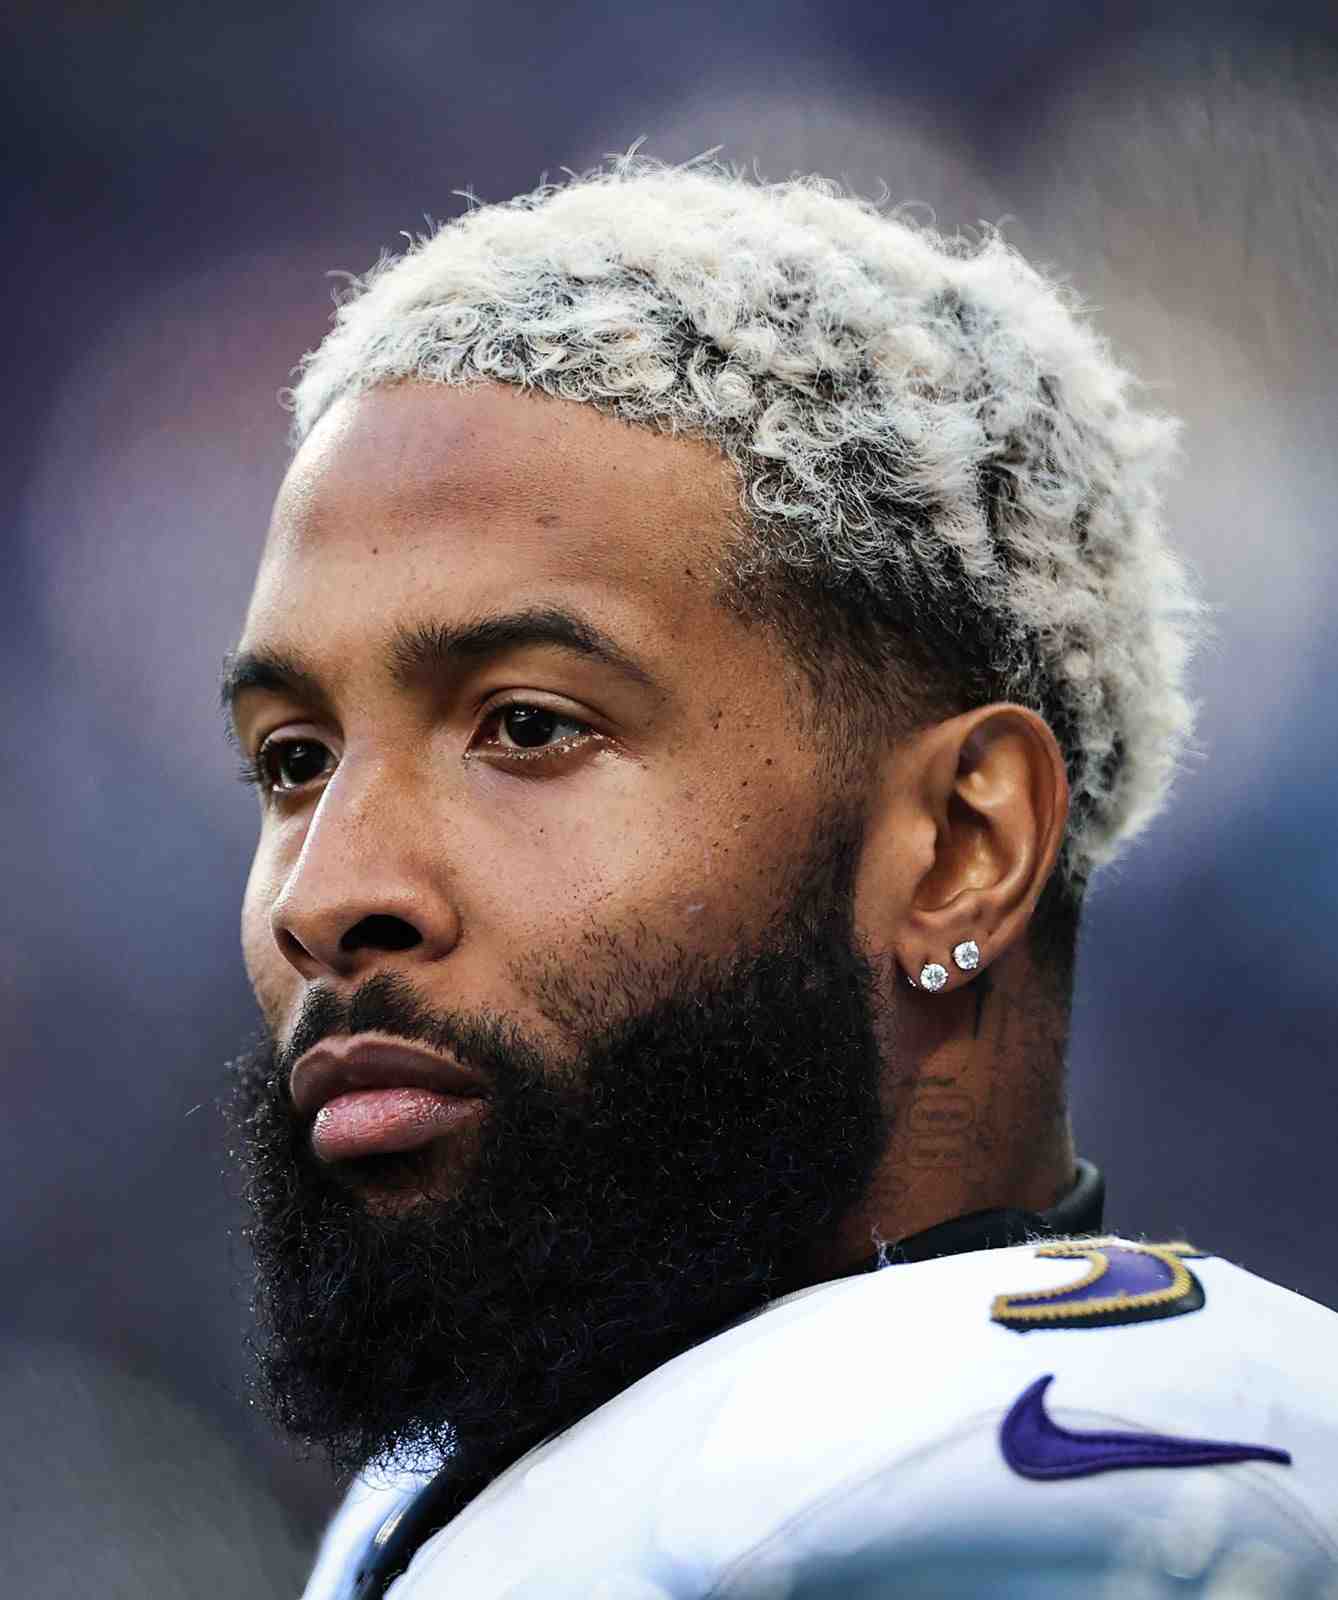 Are Kim Kardashian and Odell Beckham Jr. teeing up for a surprise union in reality TV's latest drama? Delve into the rumored romance that's keeping us on our toes.